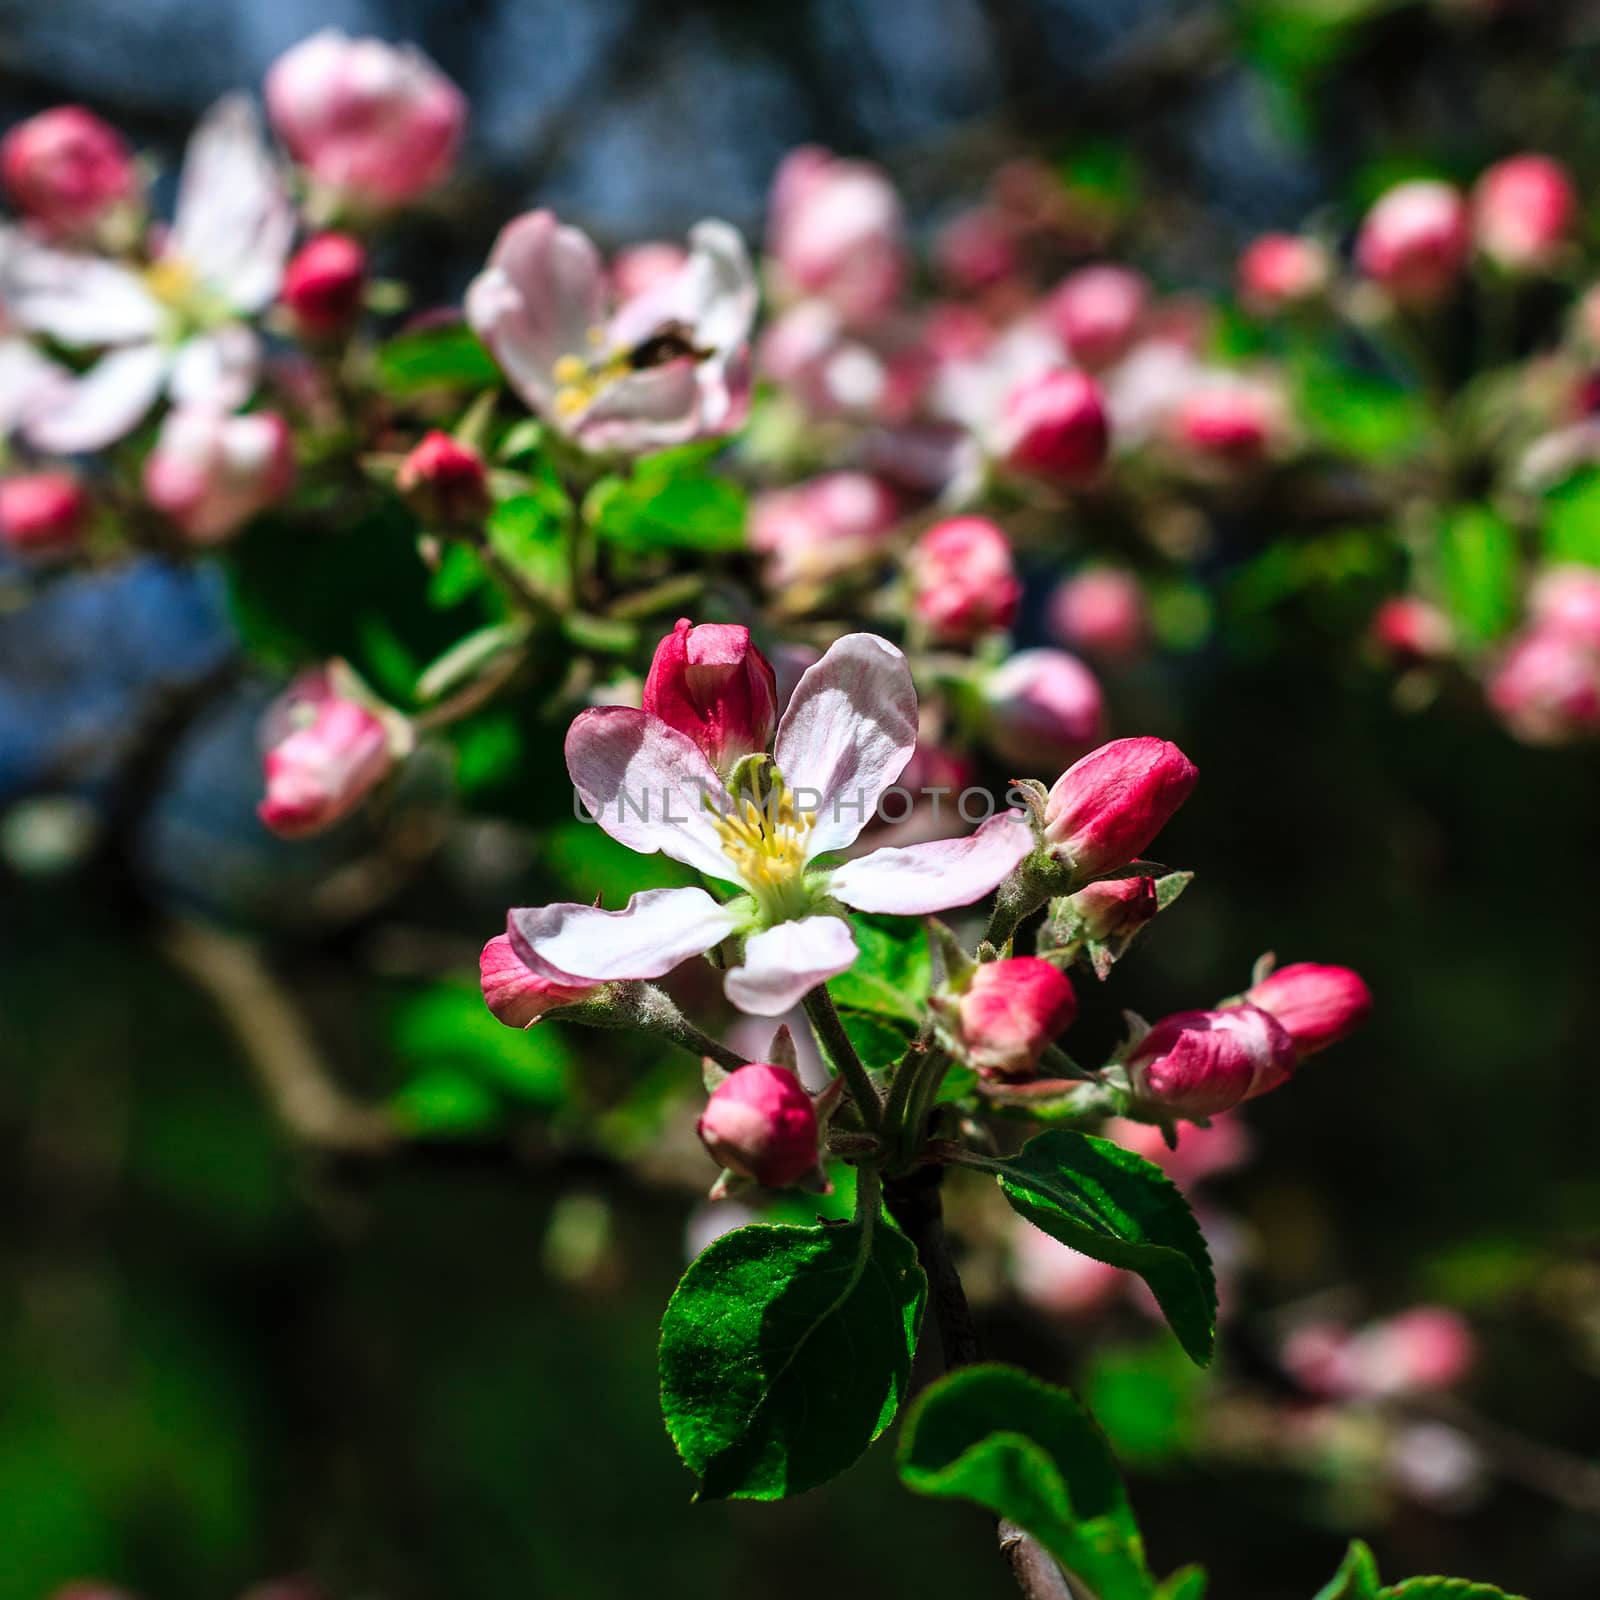 Flowers of the apple blossoms at spring season, May